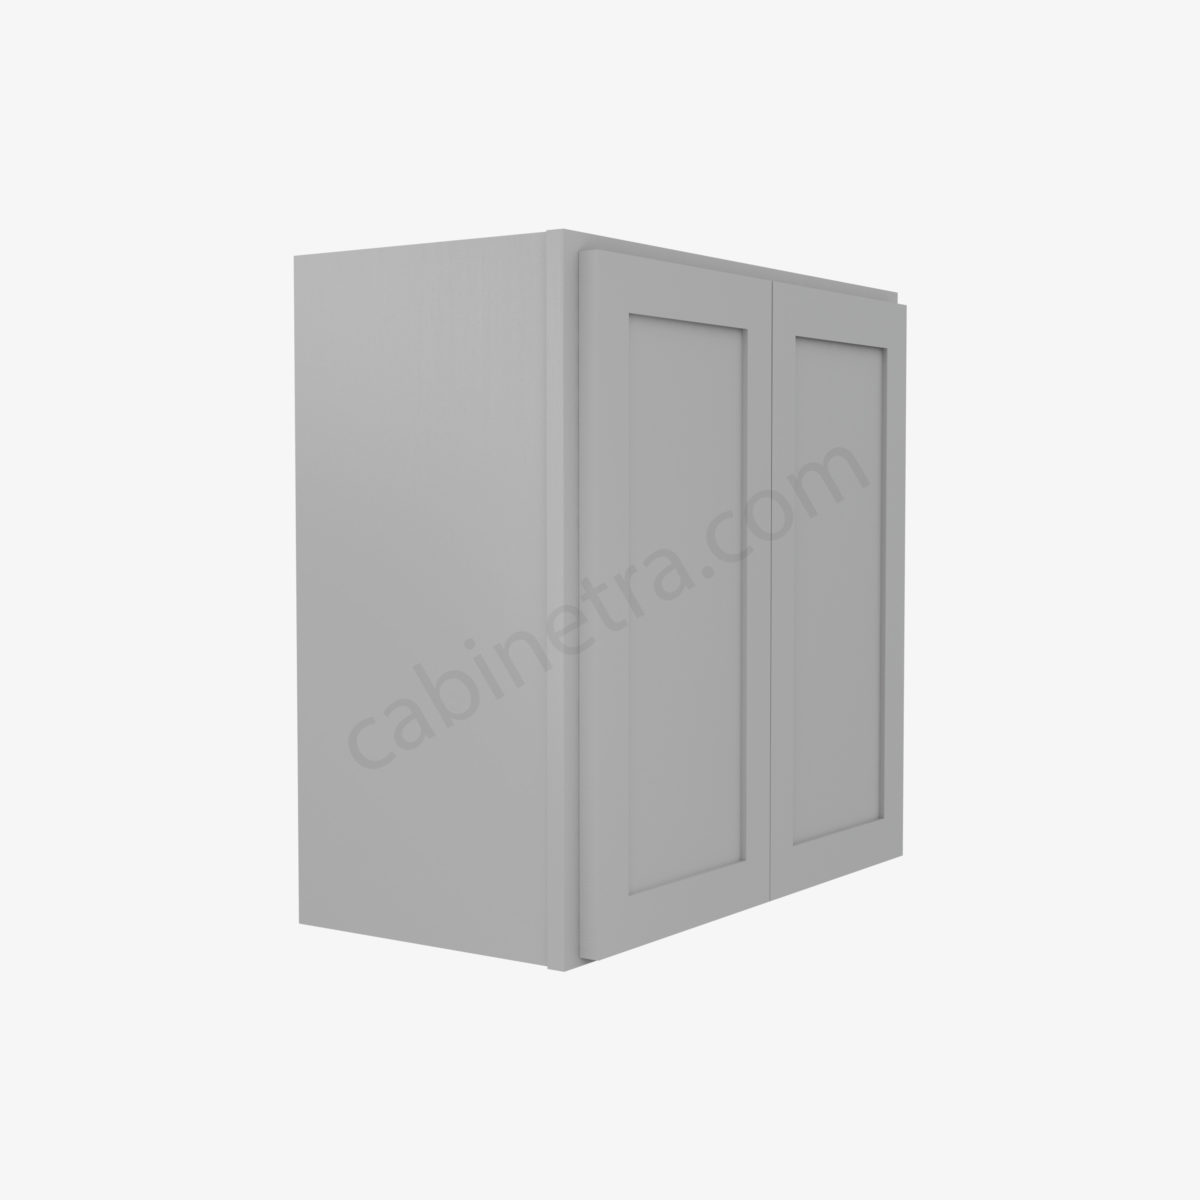 AB W2424B 4 Forevermark Lait Gray Shaker Cabinetra scaled